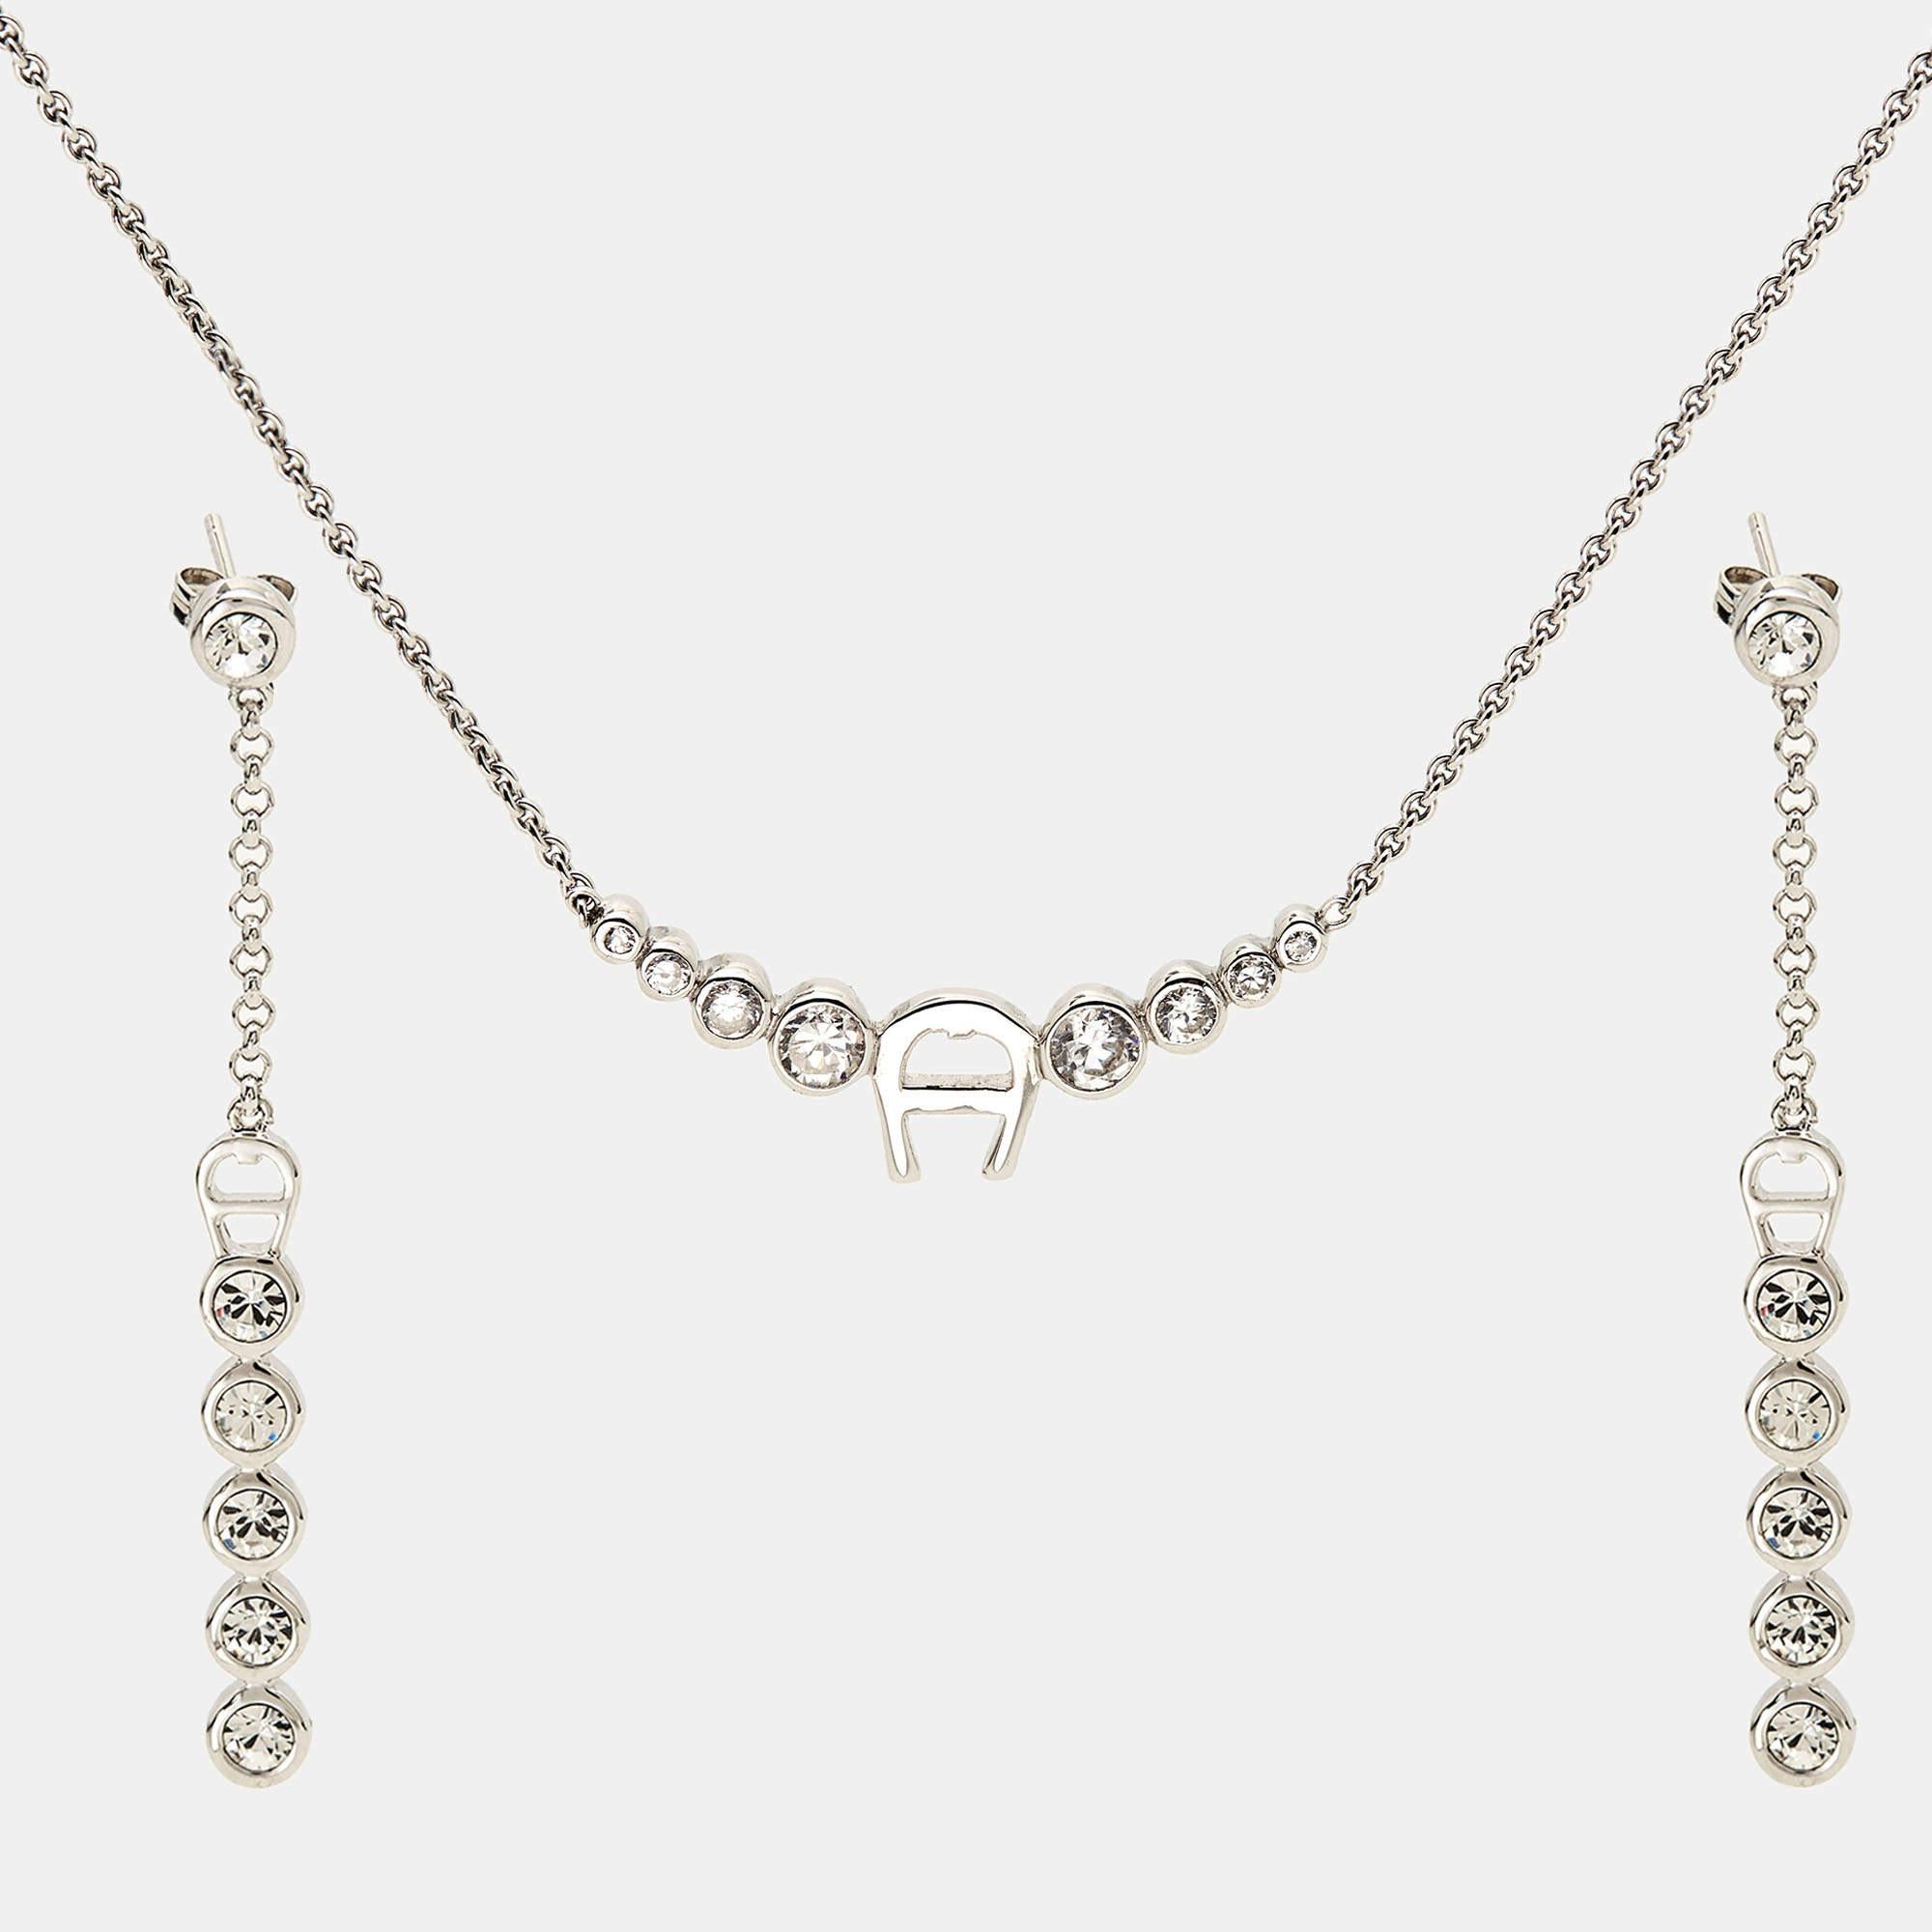 This delicate set from Aigner is made of silver and ornamented with crystals. The necklace and earrings feature a lovely design highlighted with the brand logo. The set is simple, chic, and great for special events.

Includes: Original Case

